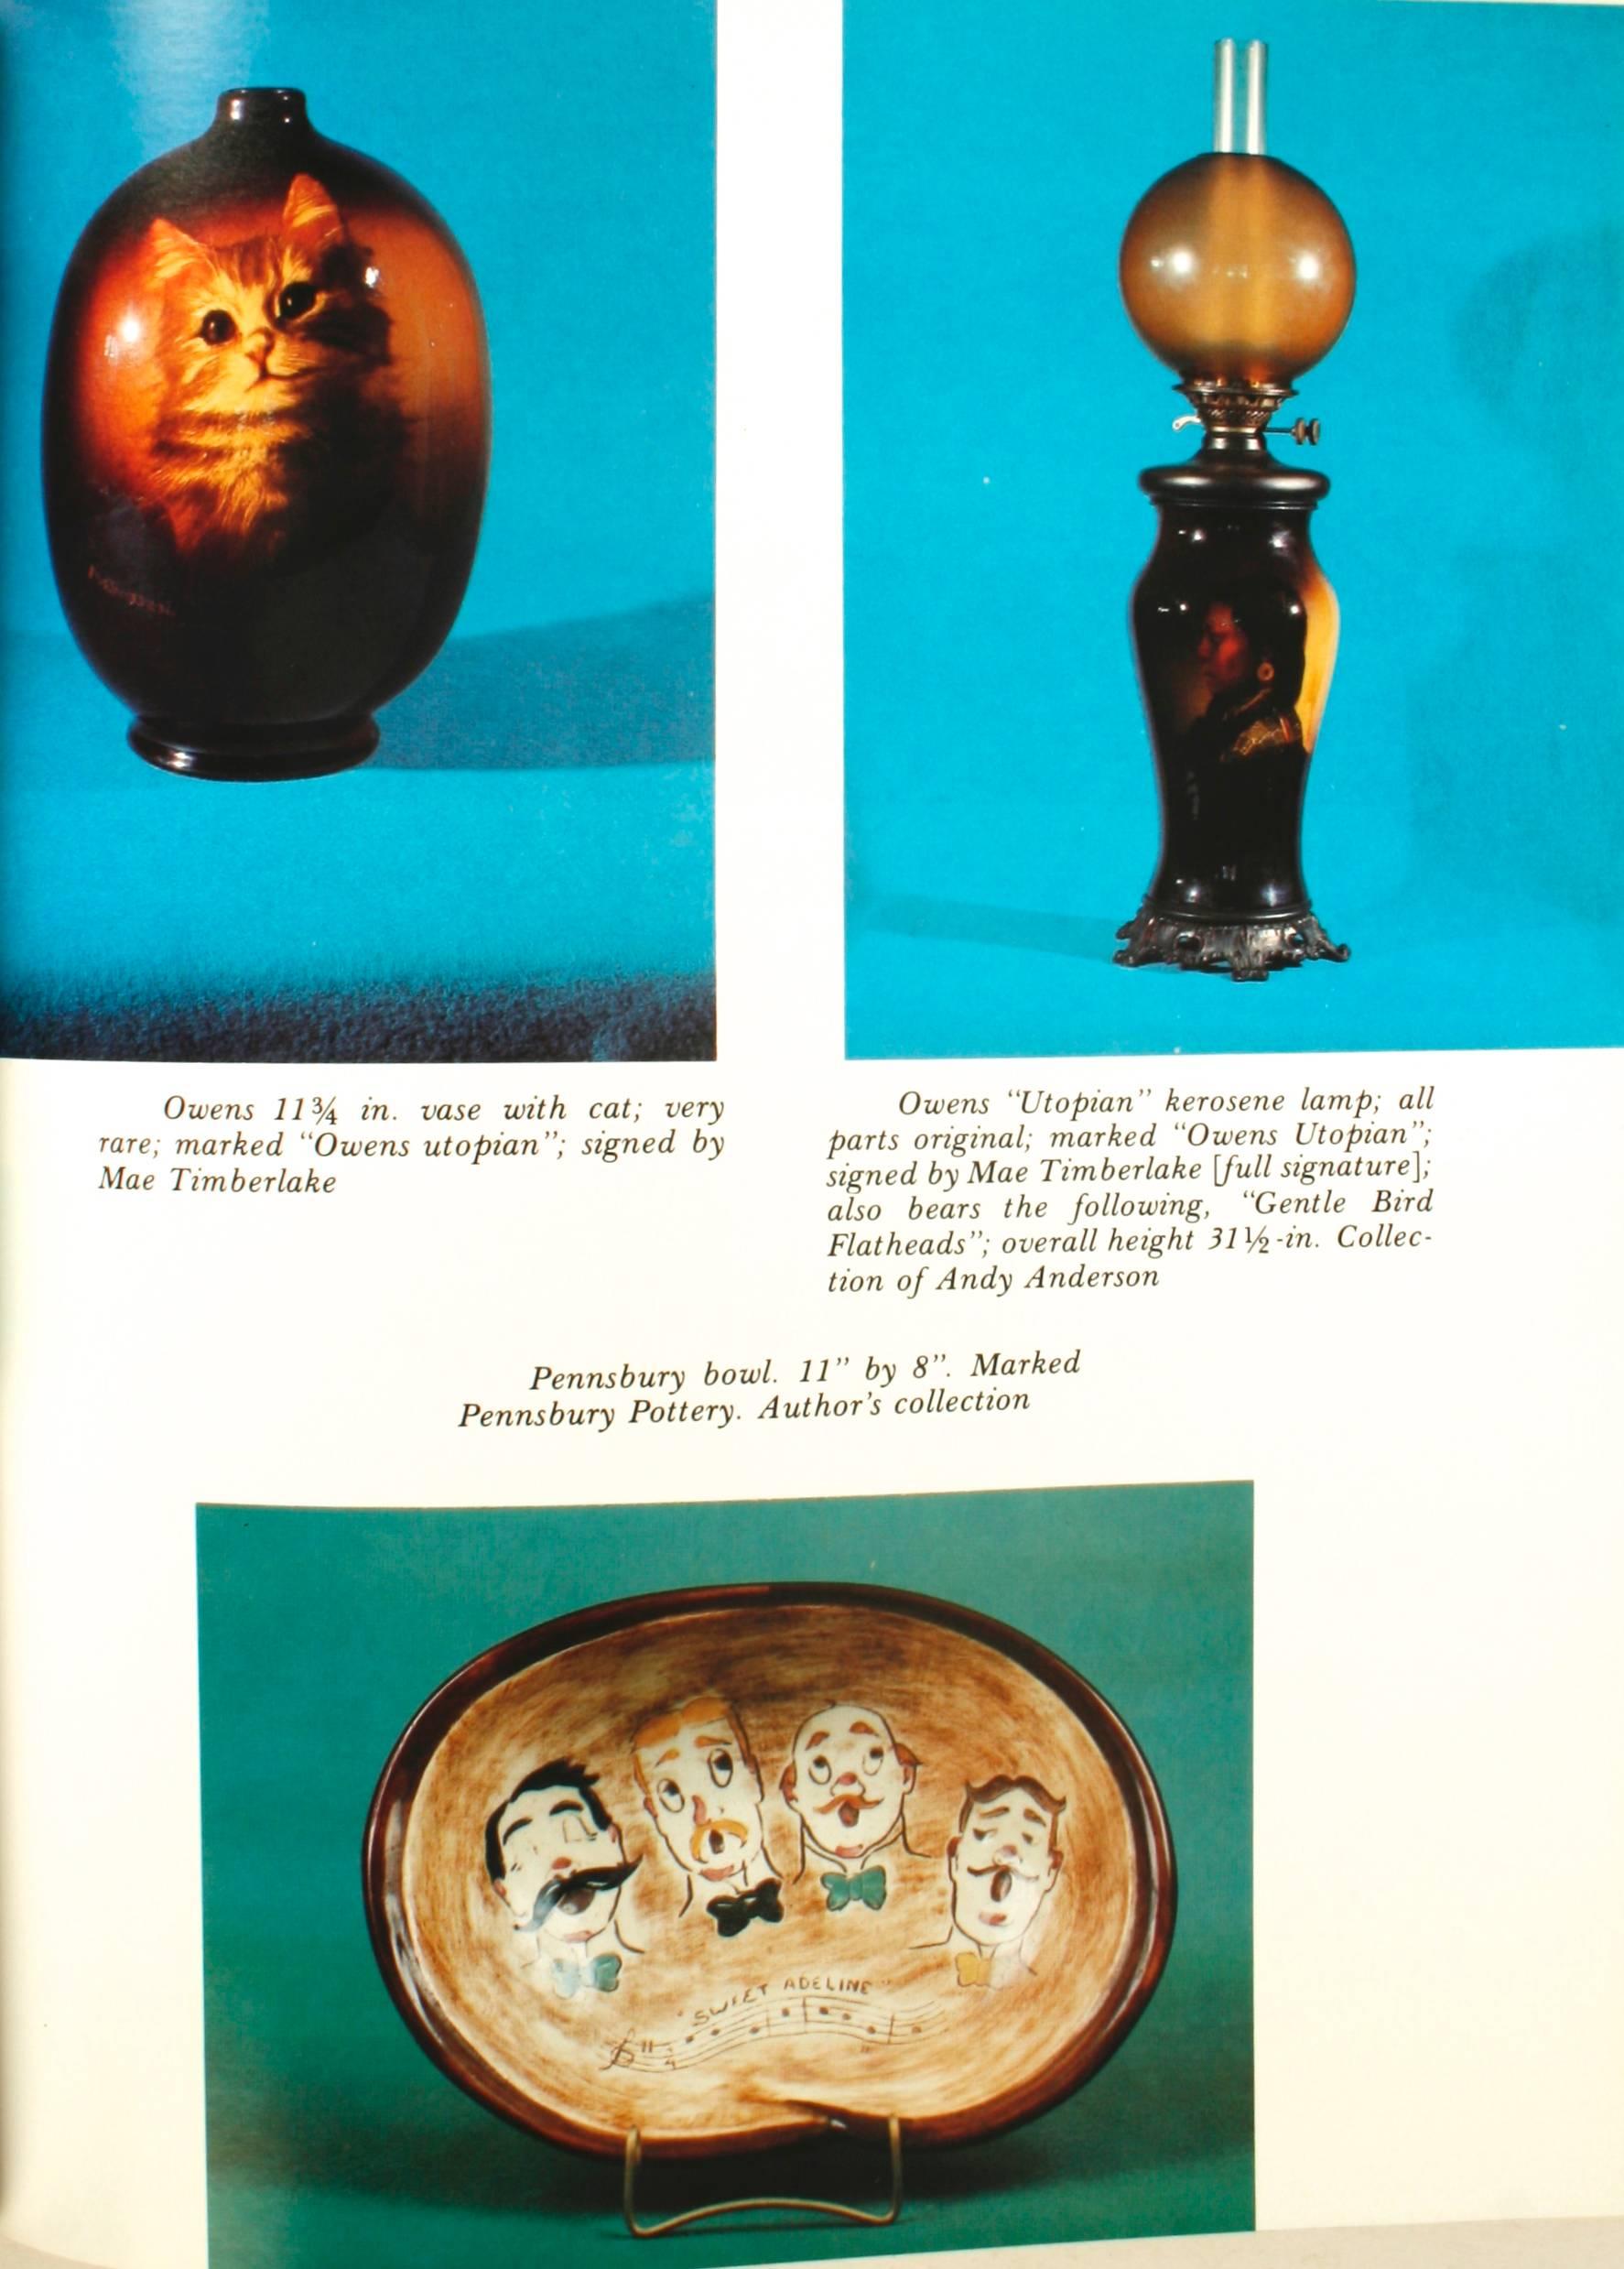 Art Pottery of America by Lucile Henske. Exton: Schiffer Publishing Limited, 1982. First edition hardcover with dust jacket. 368 pp. A study of American art pottery produced from the late 19th and early 20th centuries. It is arranged alphabetically